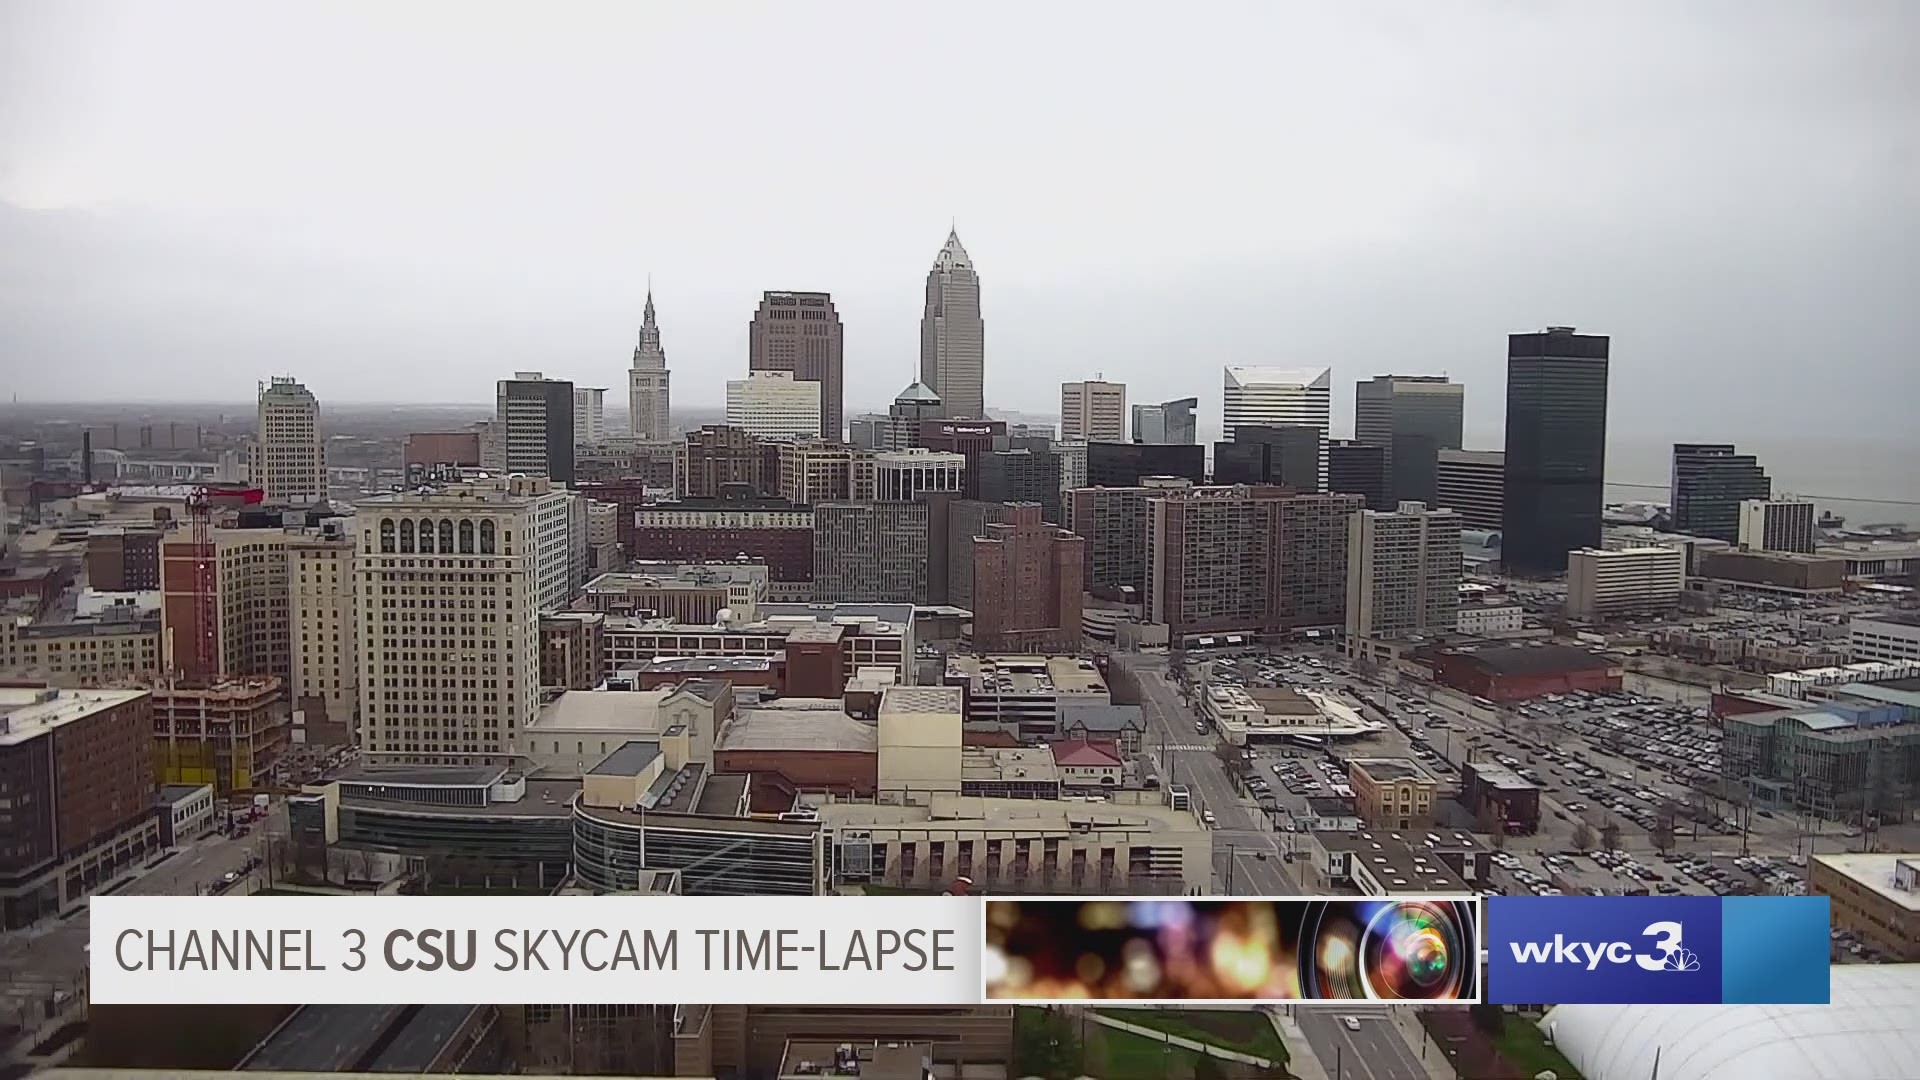 Earlier today (4/12/19), a potent front blew through the Cleveland area. Here's how it looked from the CSU Skycam in time-lapse mode. #3weather